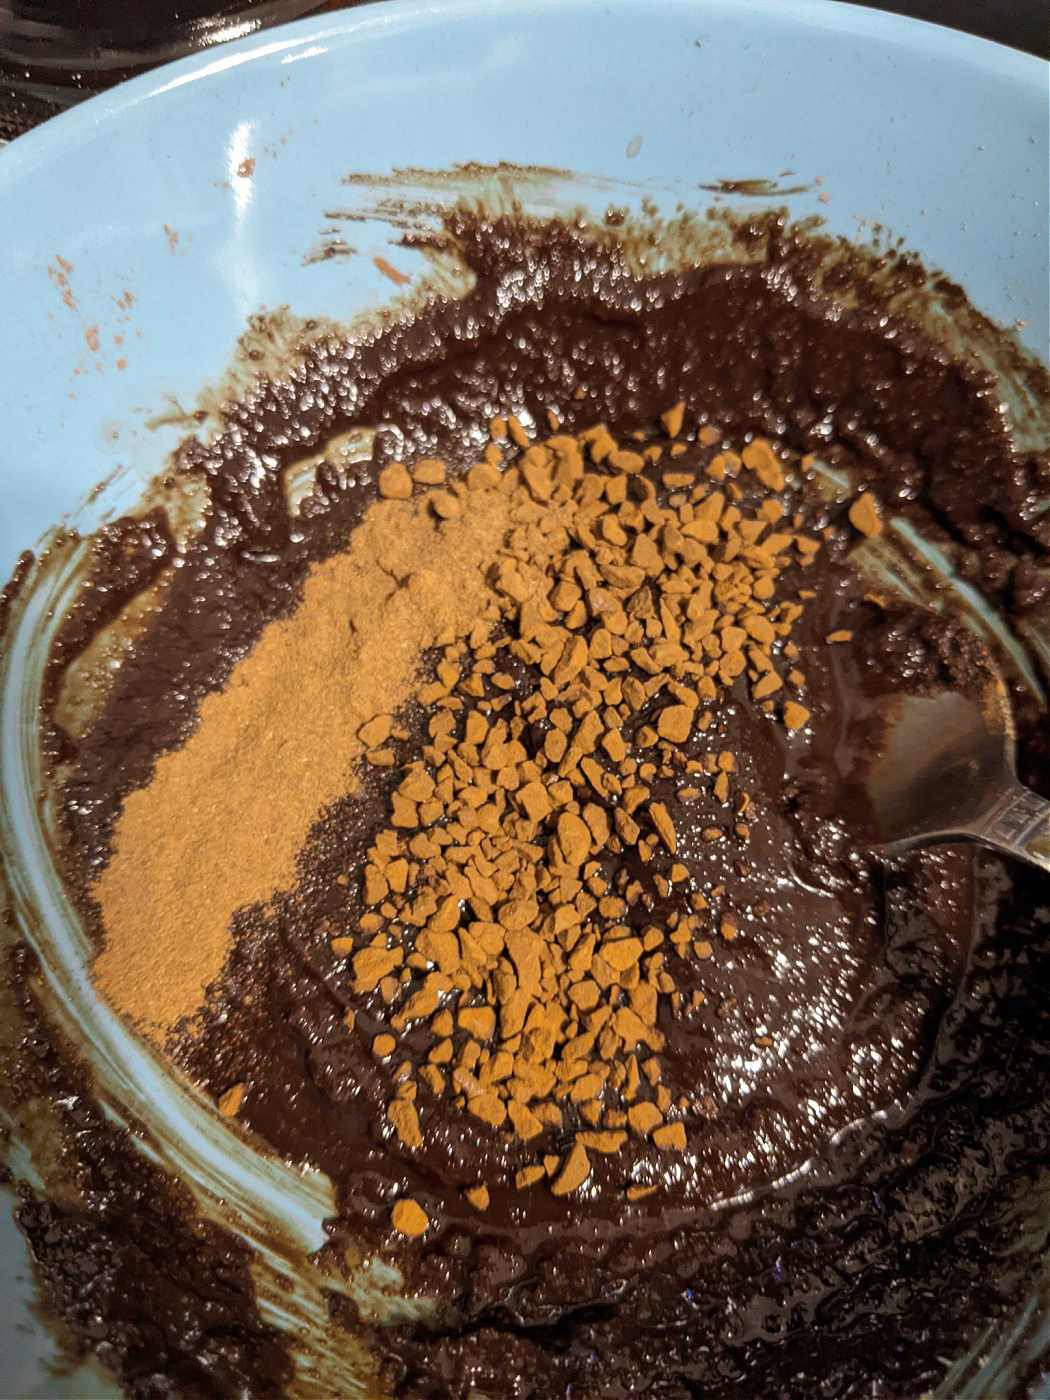 Espresso powder is mixed into a chocolate batter.